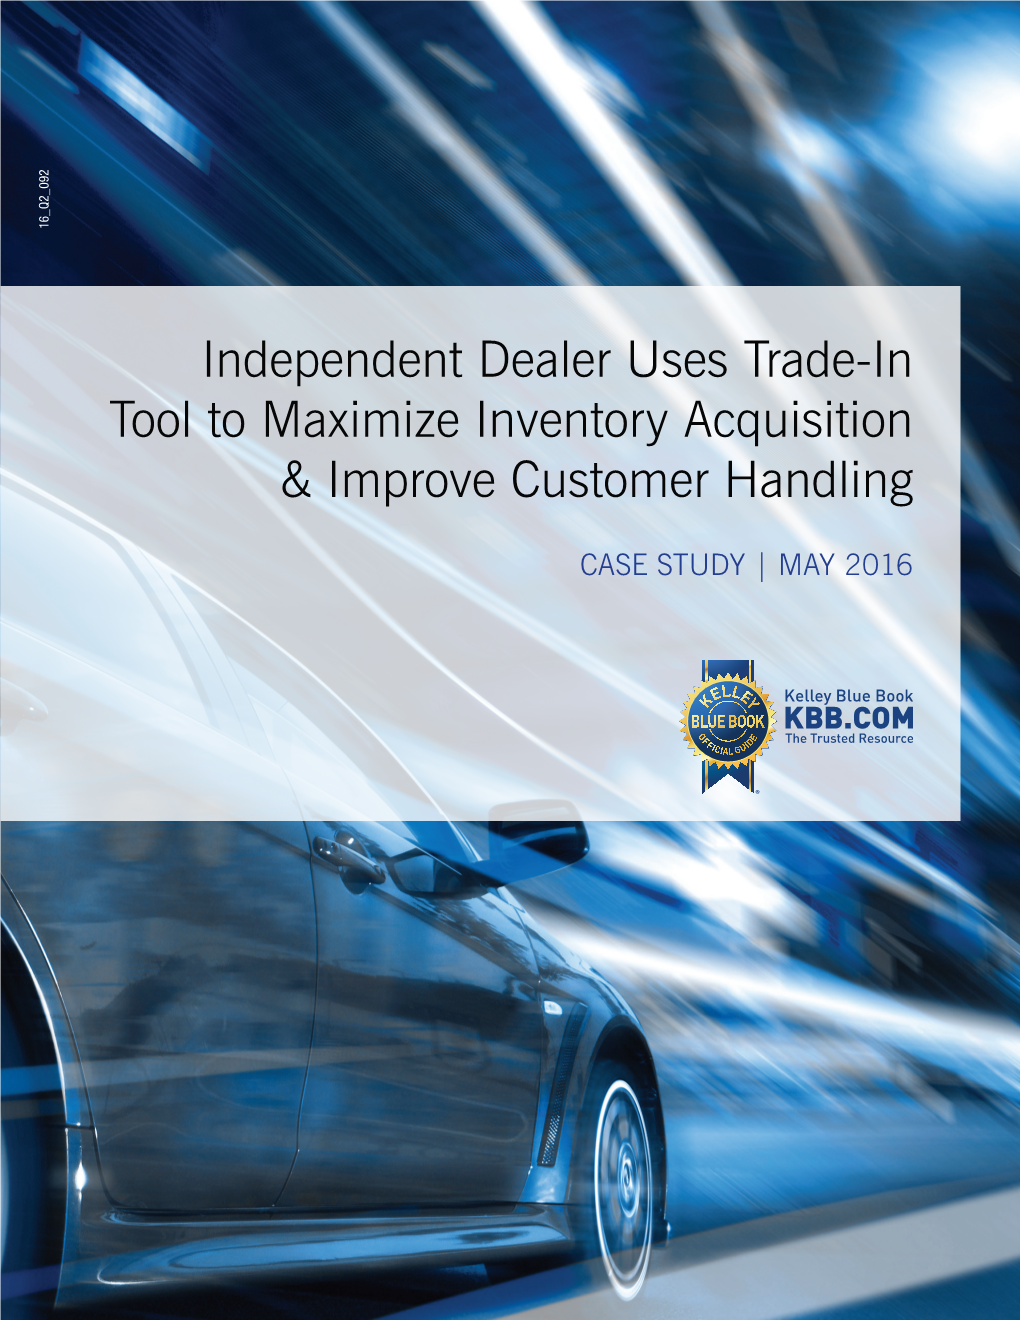 Independent Dealer Uses Trade-In Tool to Maximize Inventory Acquisition & Improve Customer Handling